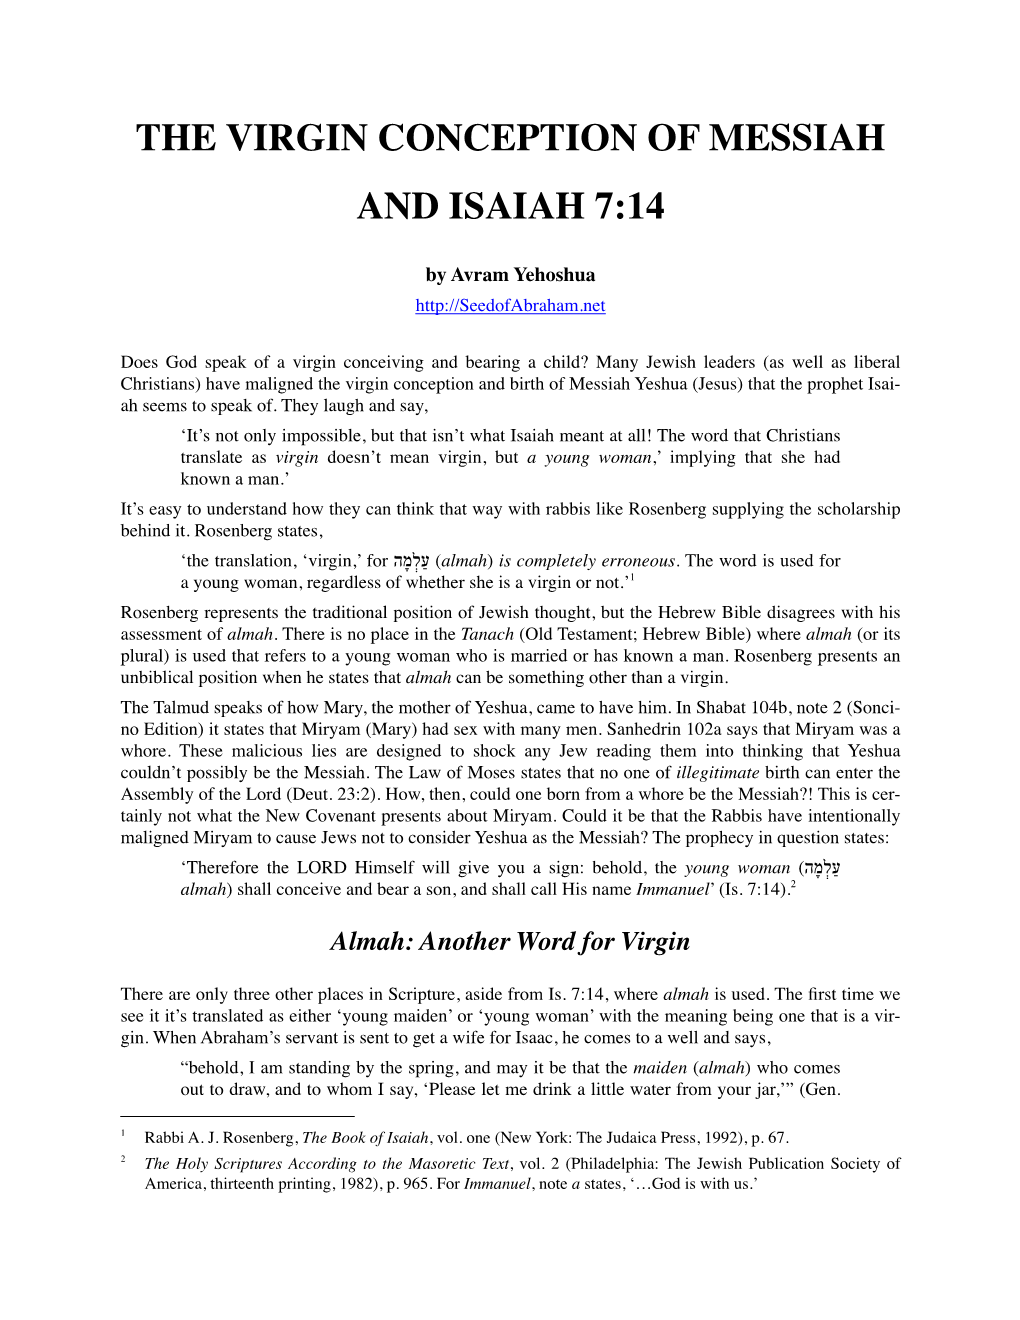 The Virgin Conception of Messiah and Isaiah 7:14